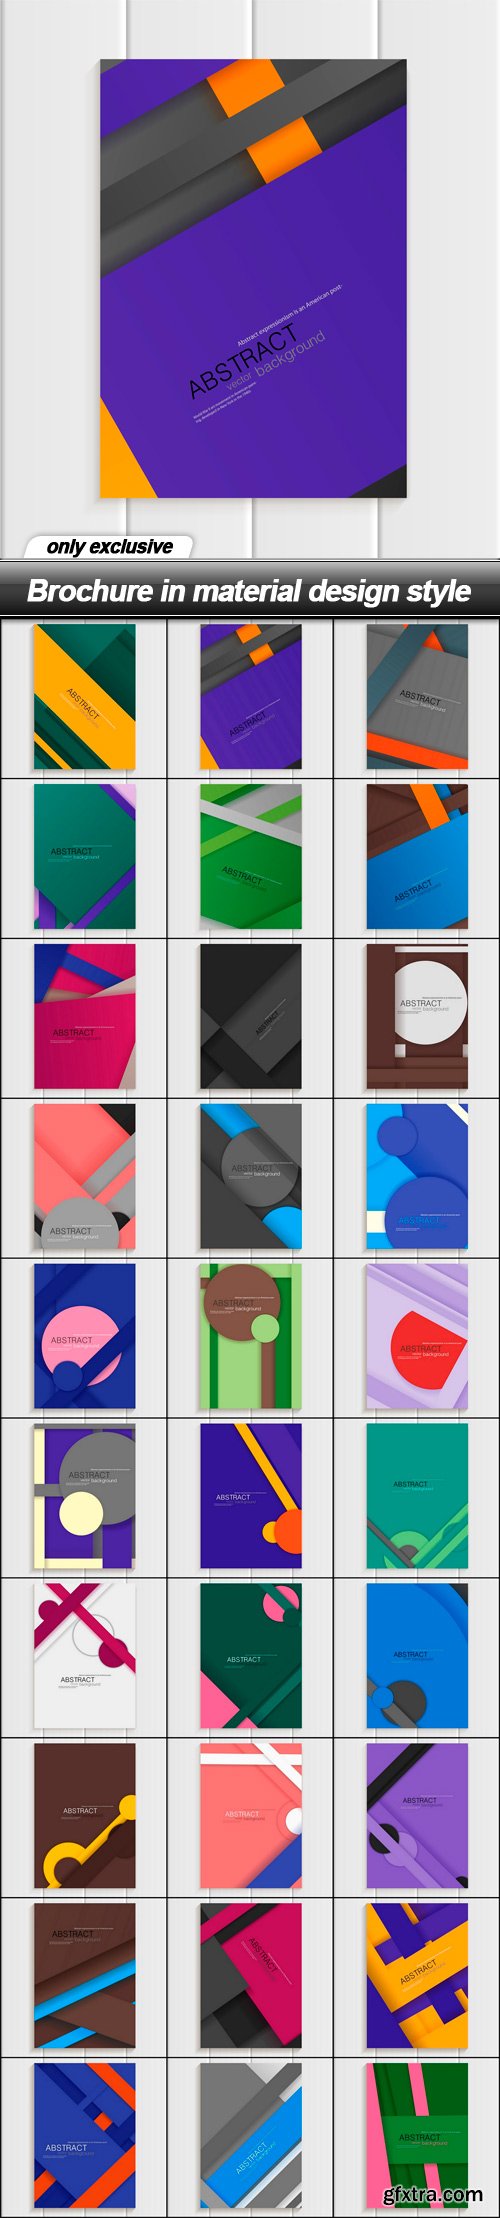 Brochure in material design style - 30 EPS